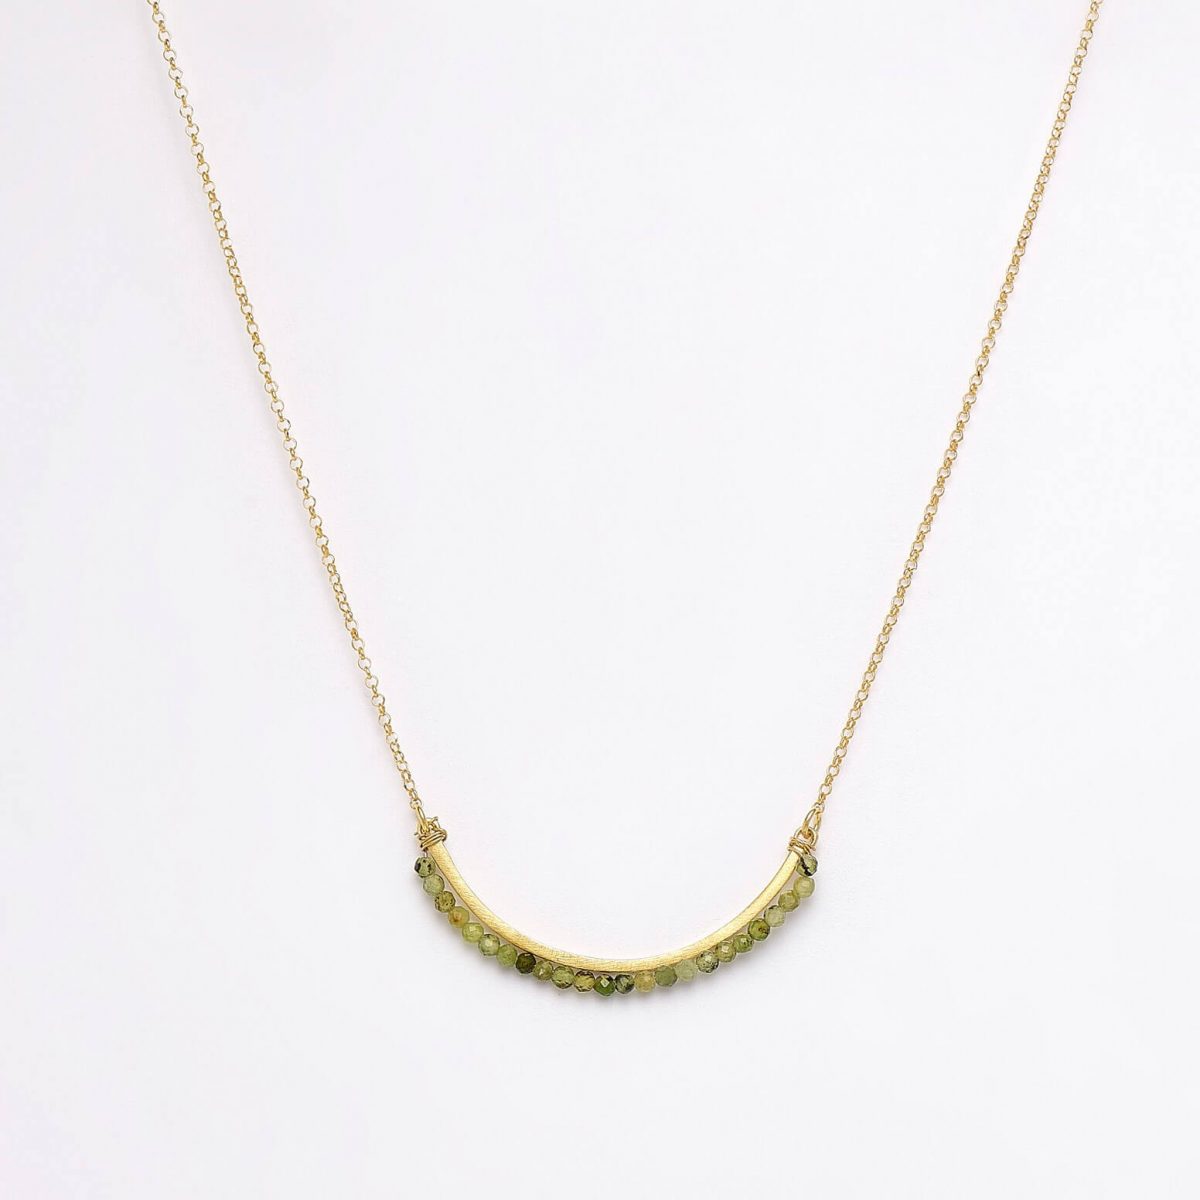 Green Candy Necklace by Xoutou's